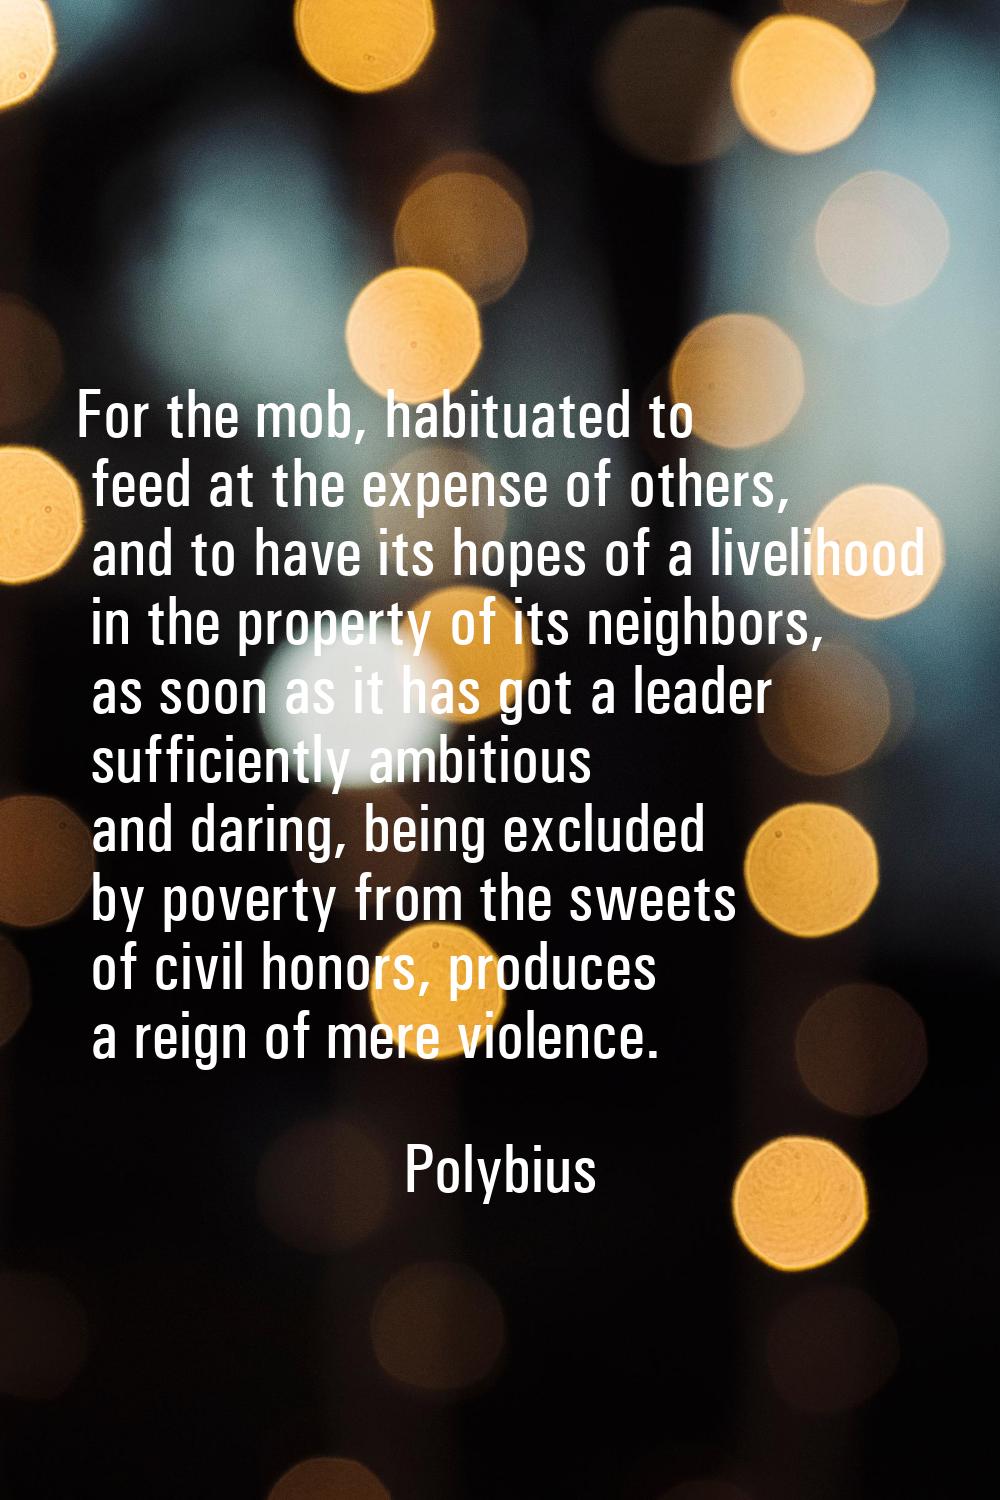 For the mob, habituated to feed at the expense of others, and to have its hopes of a livelihood in 